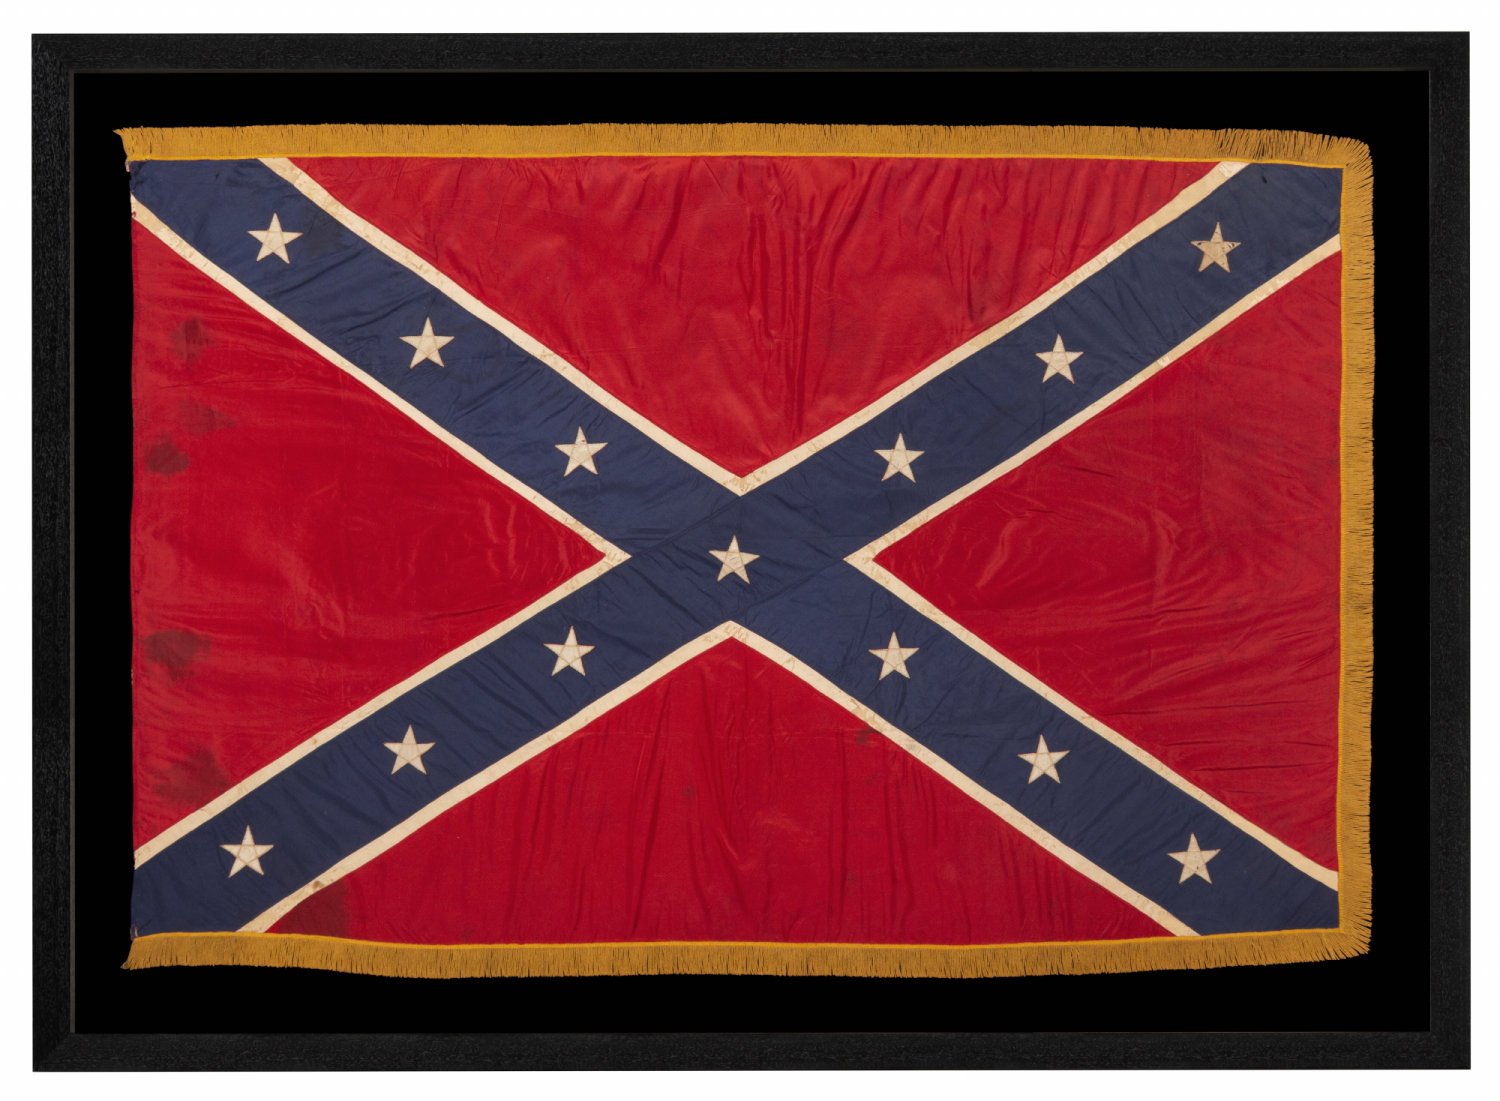 CONFEDERATE SOUTHERN CROSS “BATTLE FLAG”, OF THE REUNION ERA, MADE ENTIRELY OF SILK, WITH A SILK FRINGE, CIRCA 1895-1920